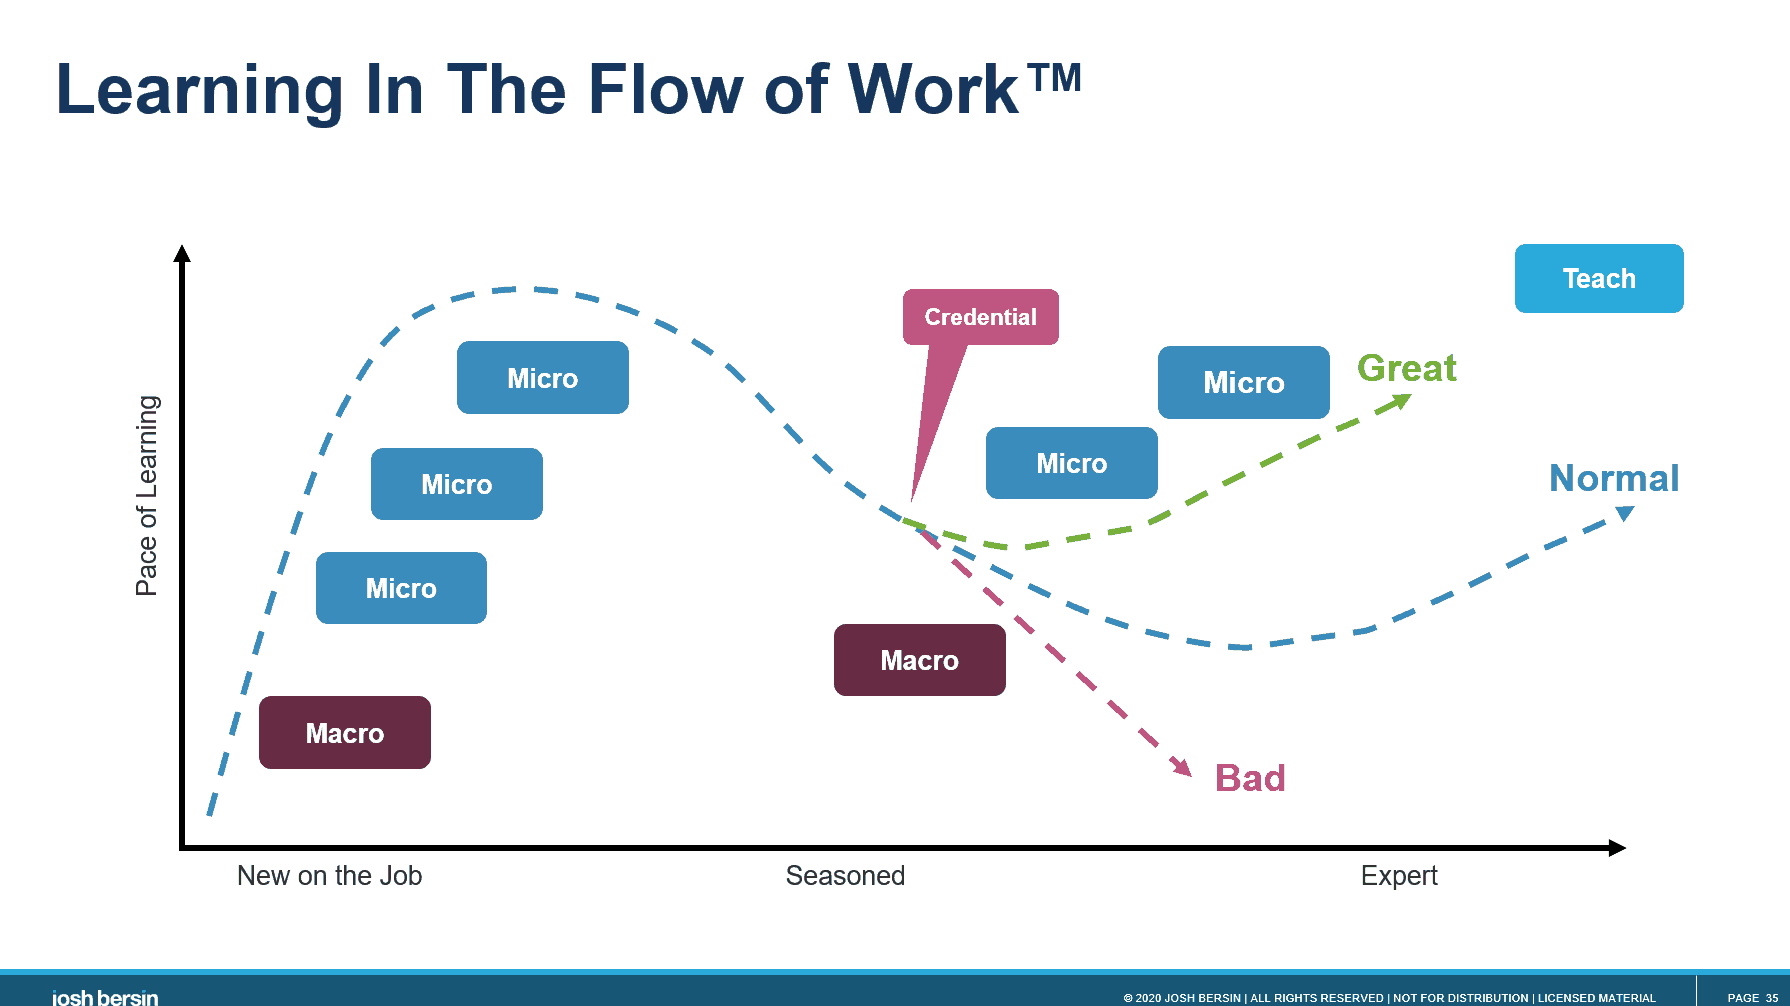 Learning in the flow of work